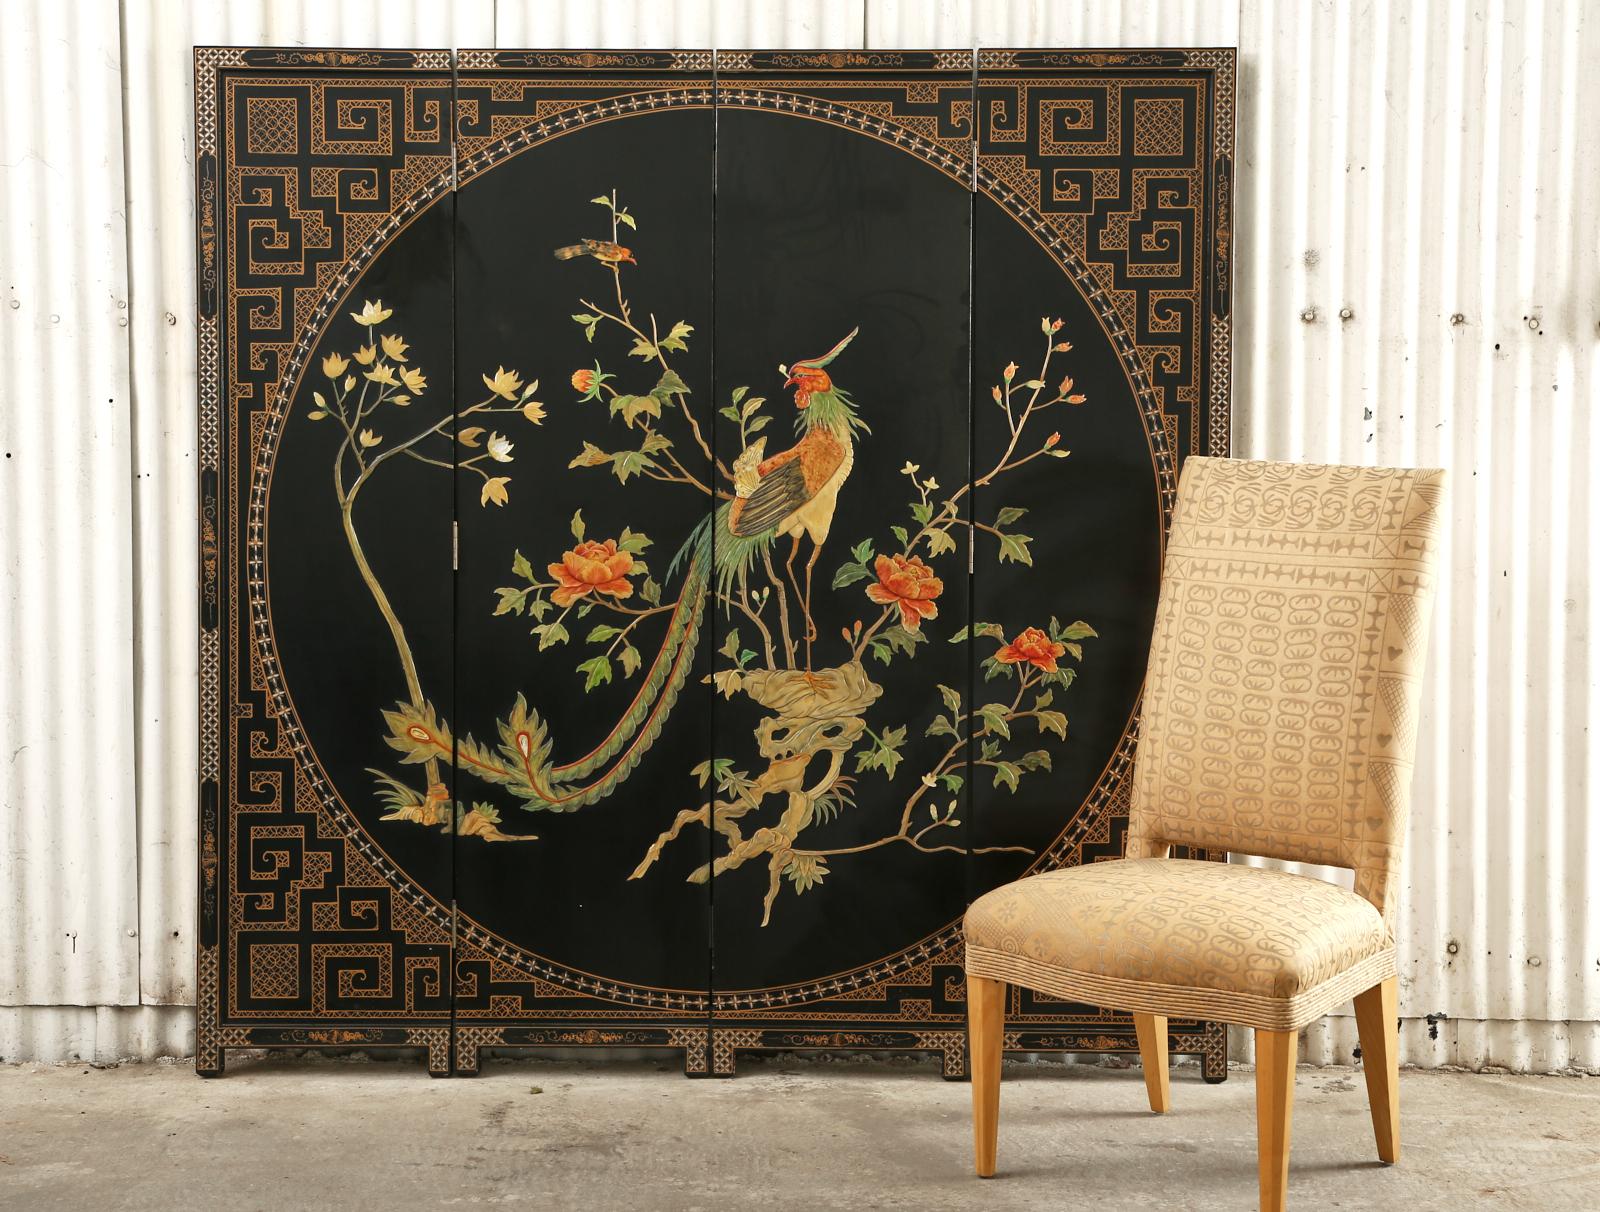 Dramatic Chinese export Coromandel screen featuring a large phoenix crafted from painted mother of pearl. The four-panel screen has a black lacquer ground with parcel gilt geometric borders making a round window frame. The center is decorated with